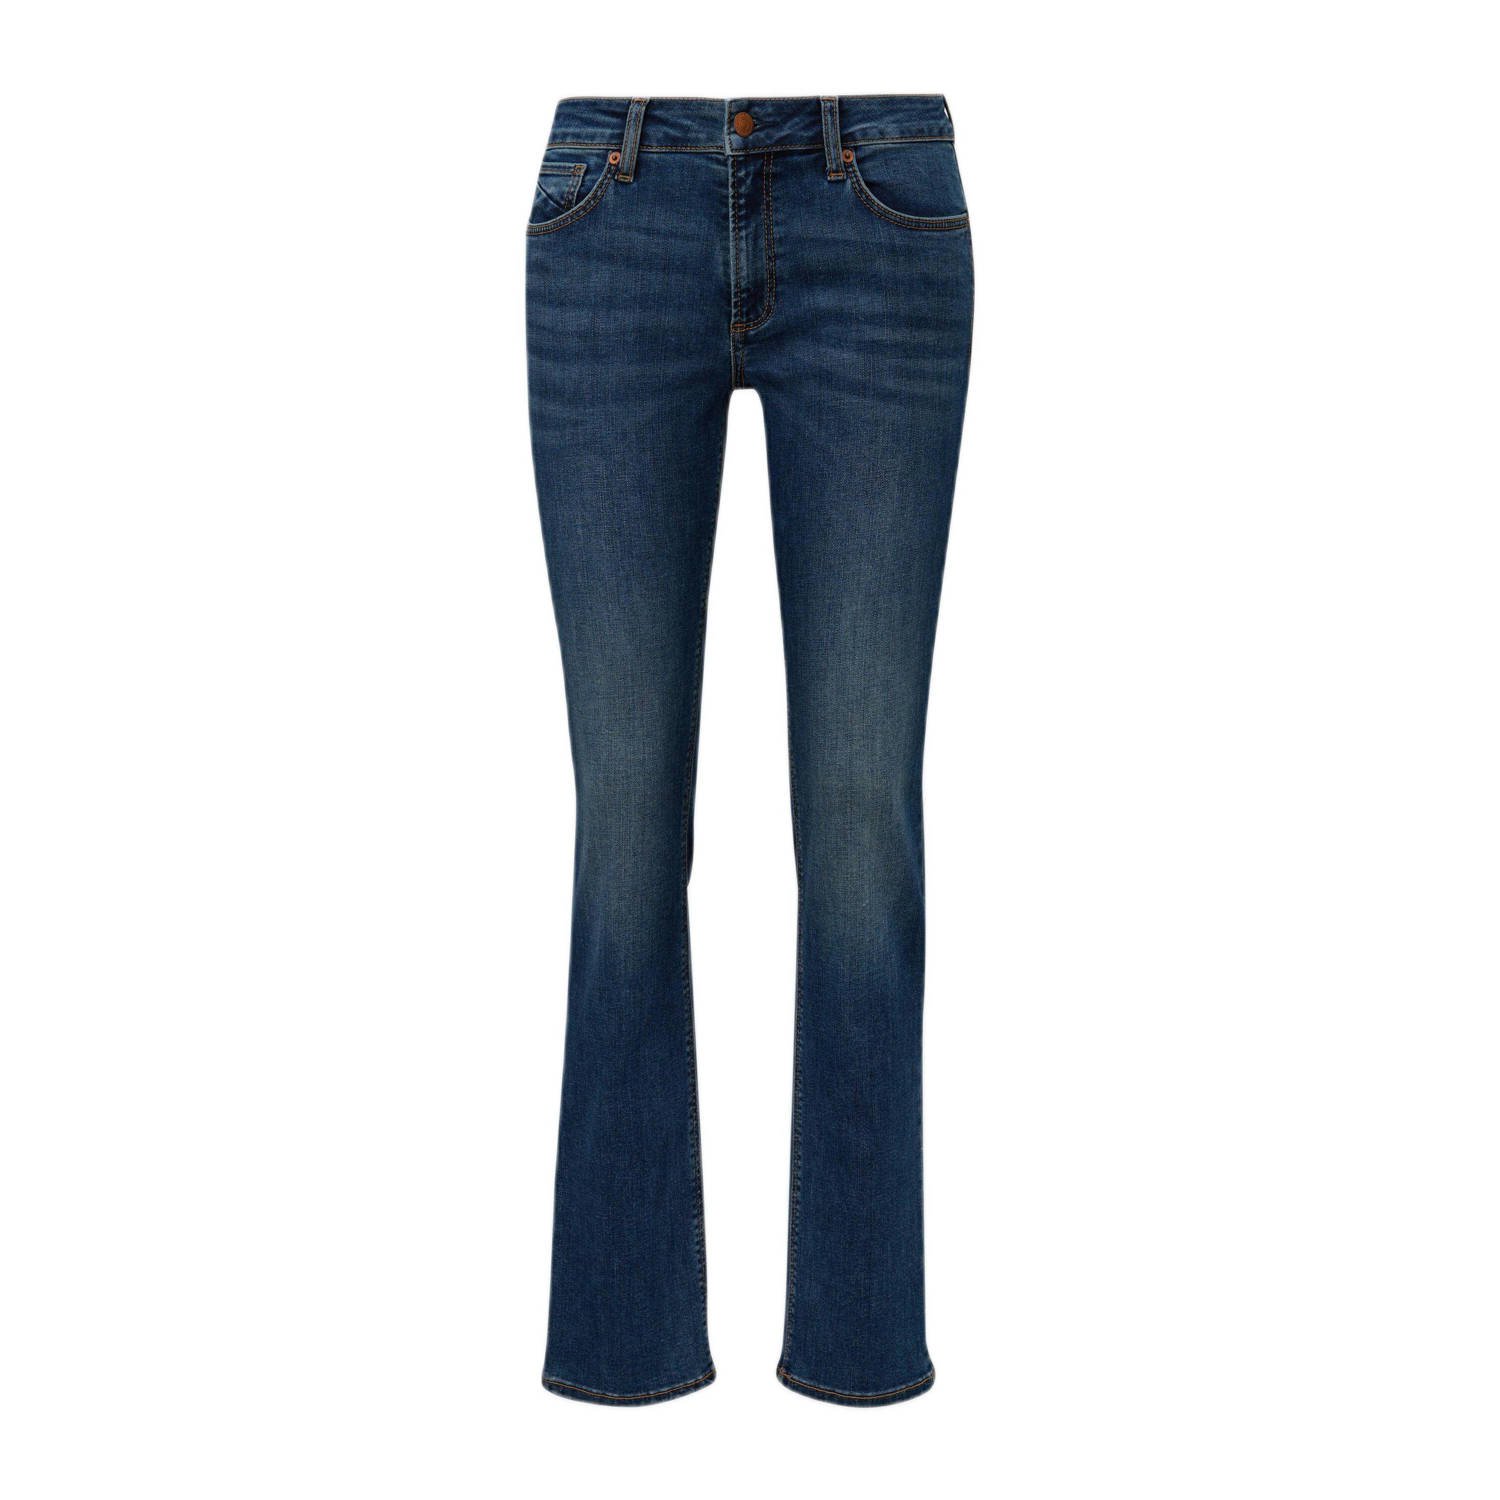 Q S by s.Oliver slim fit jeans blue